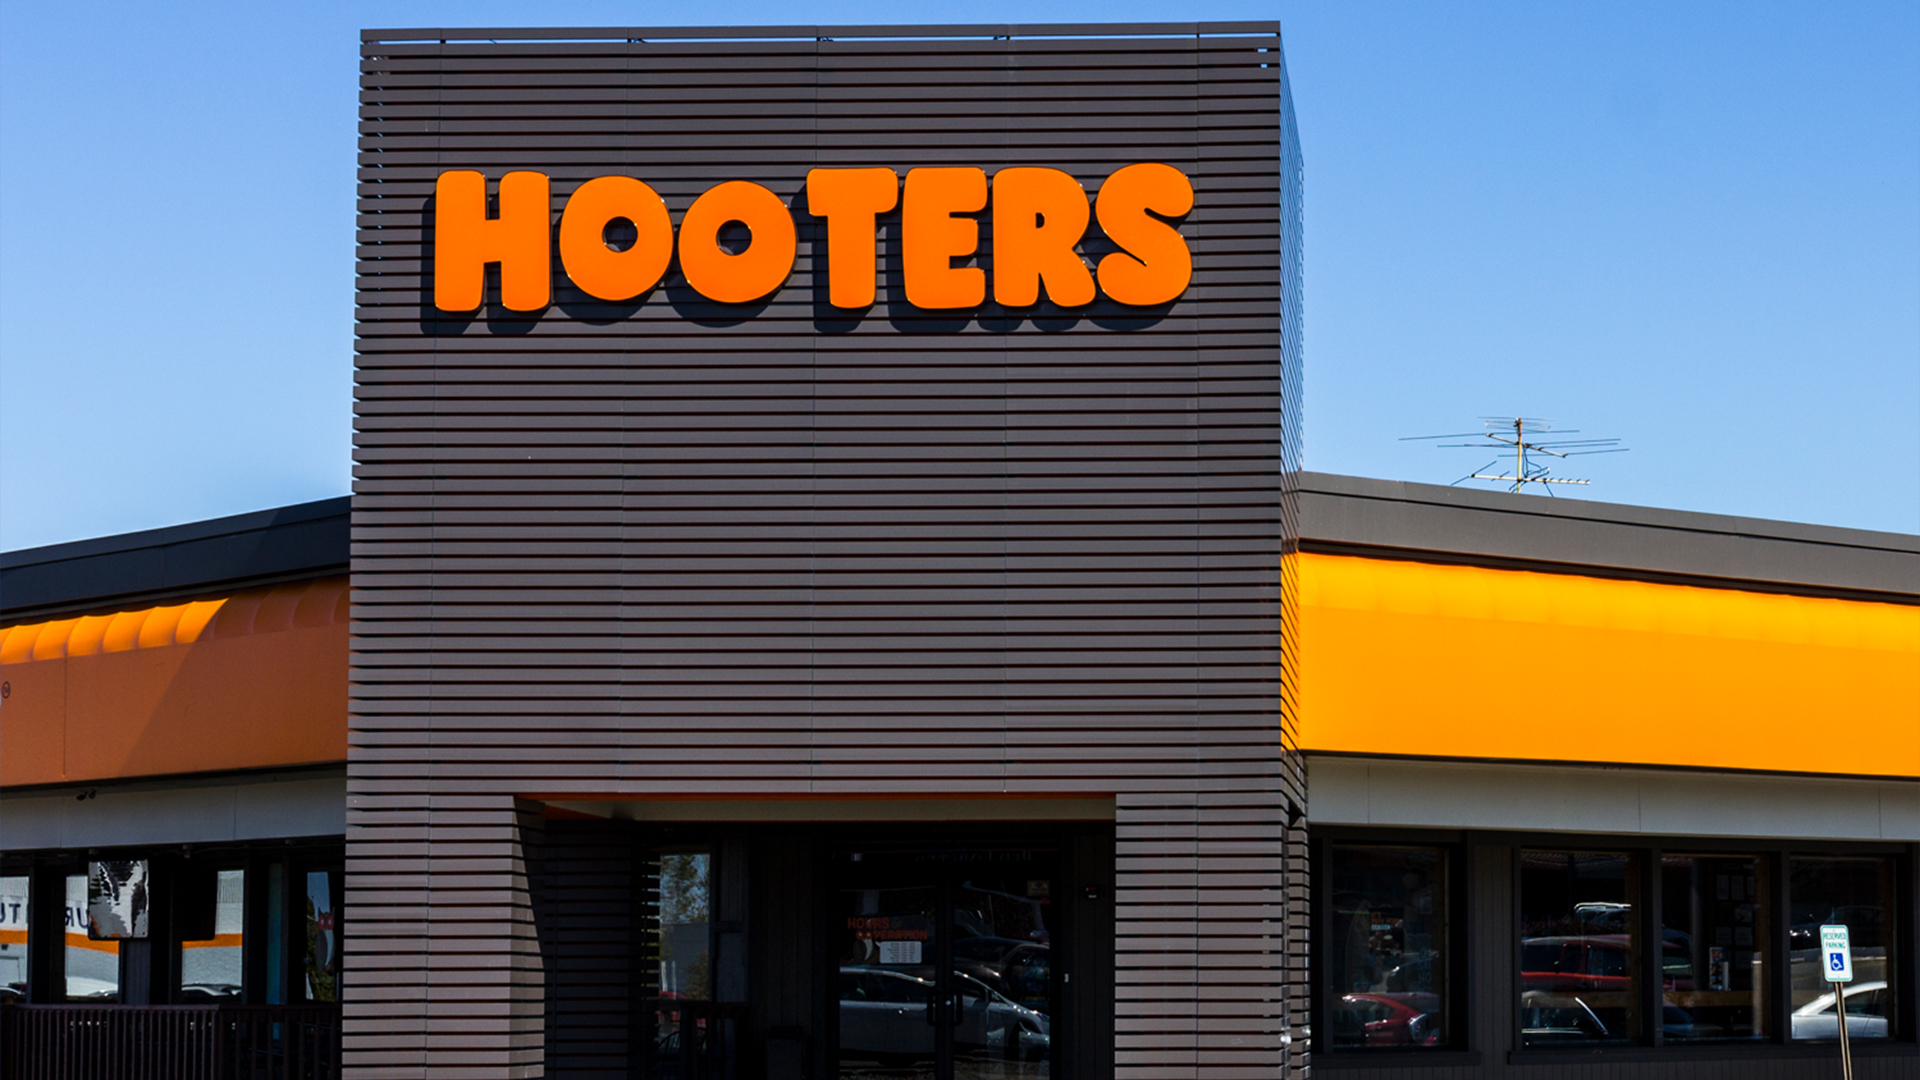 I’m a former Hooters girl – I was fired for leaving work to go to a job interview, people say they’re rooting for me